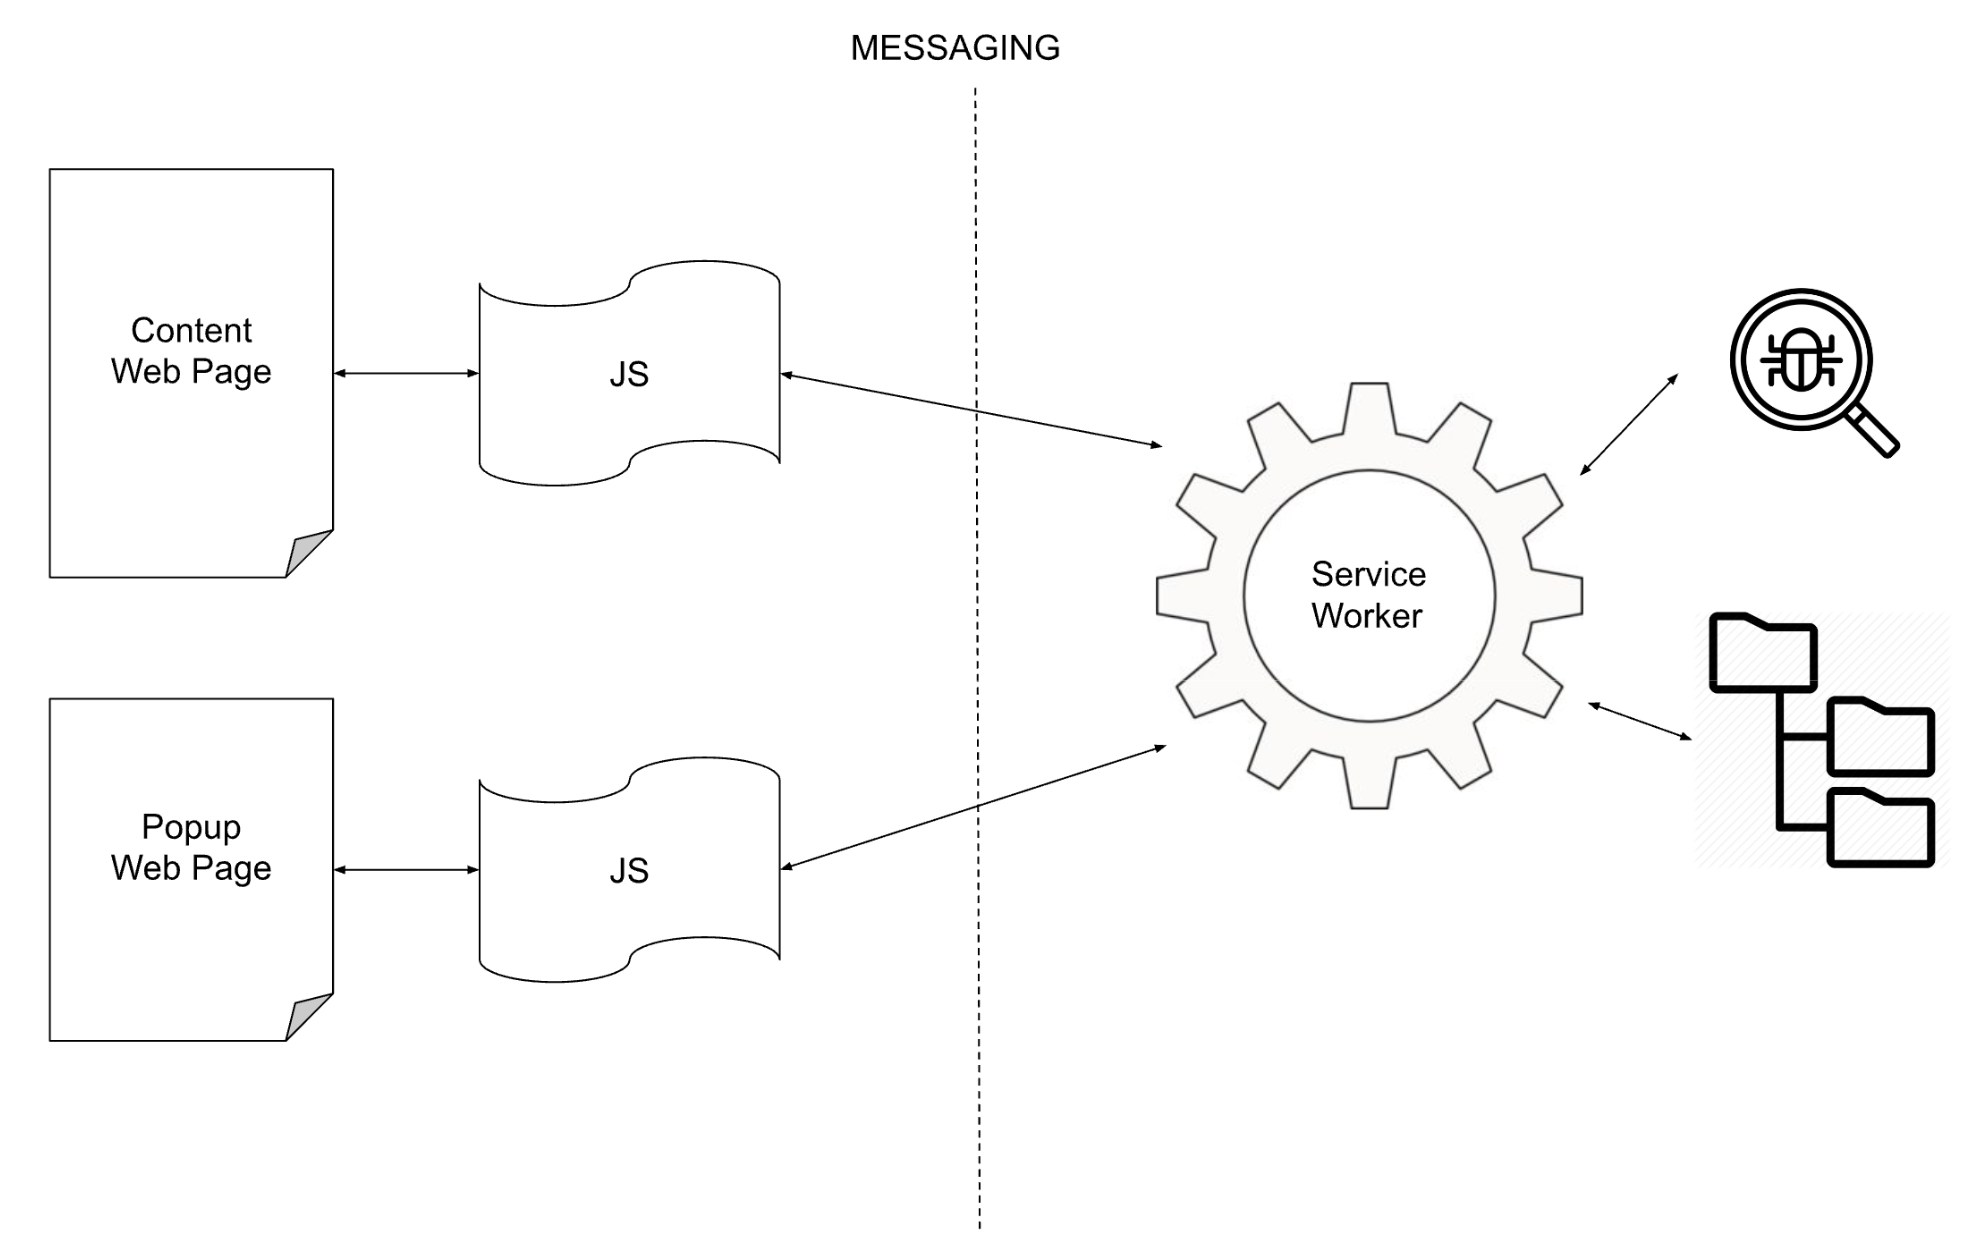  Infographic on messaging service worker